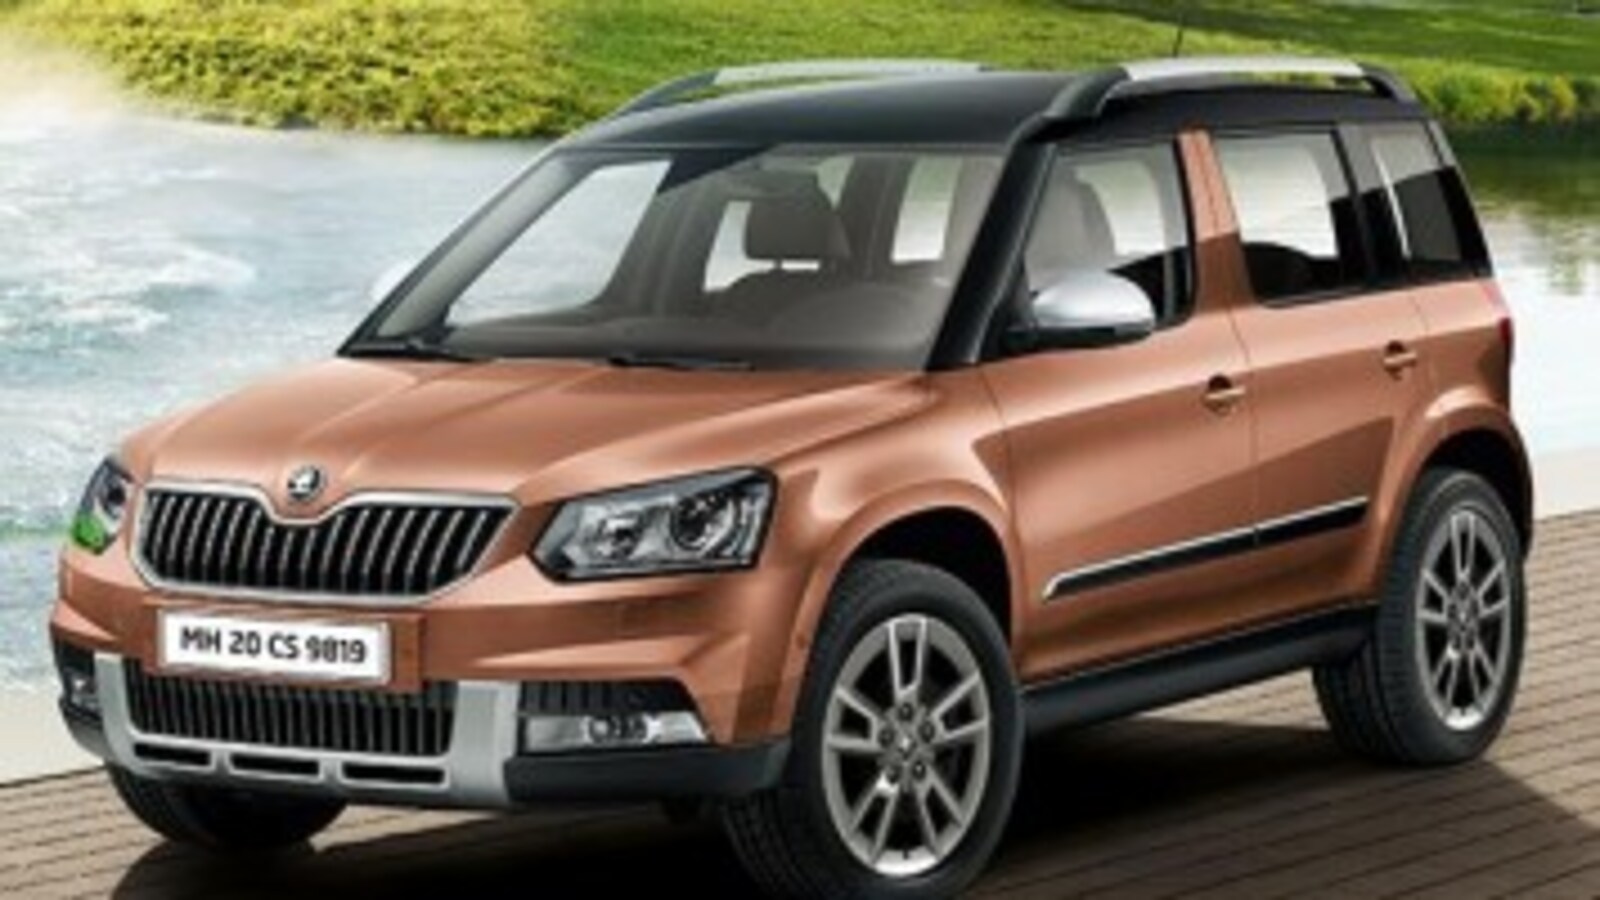 Skoda Yeti facelift launched at Rs 18.63 lakh